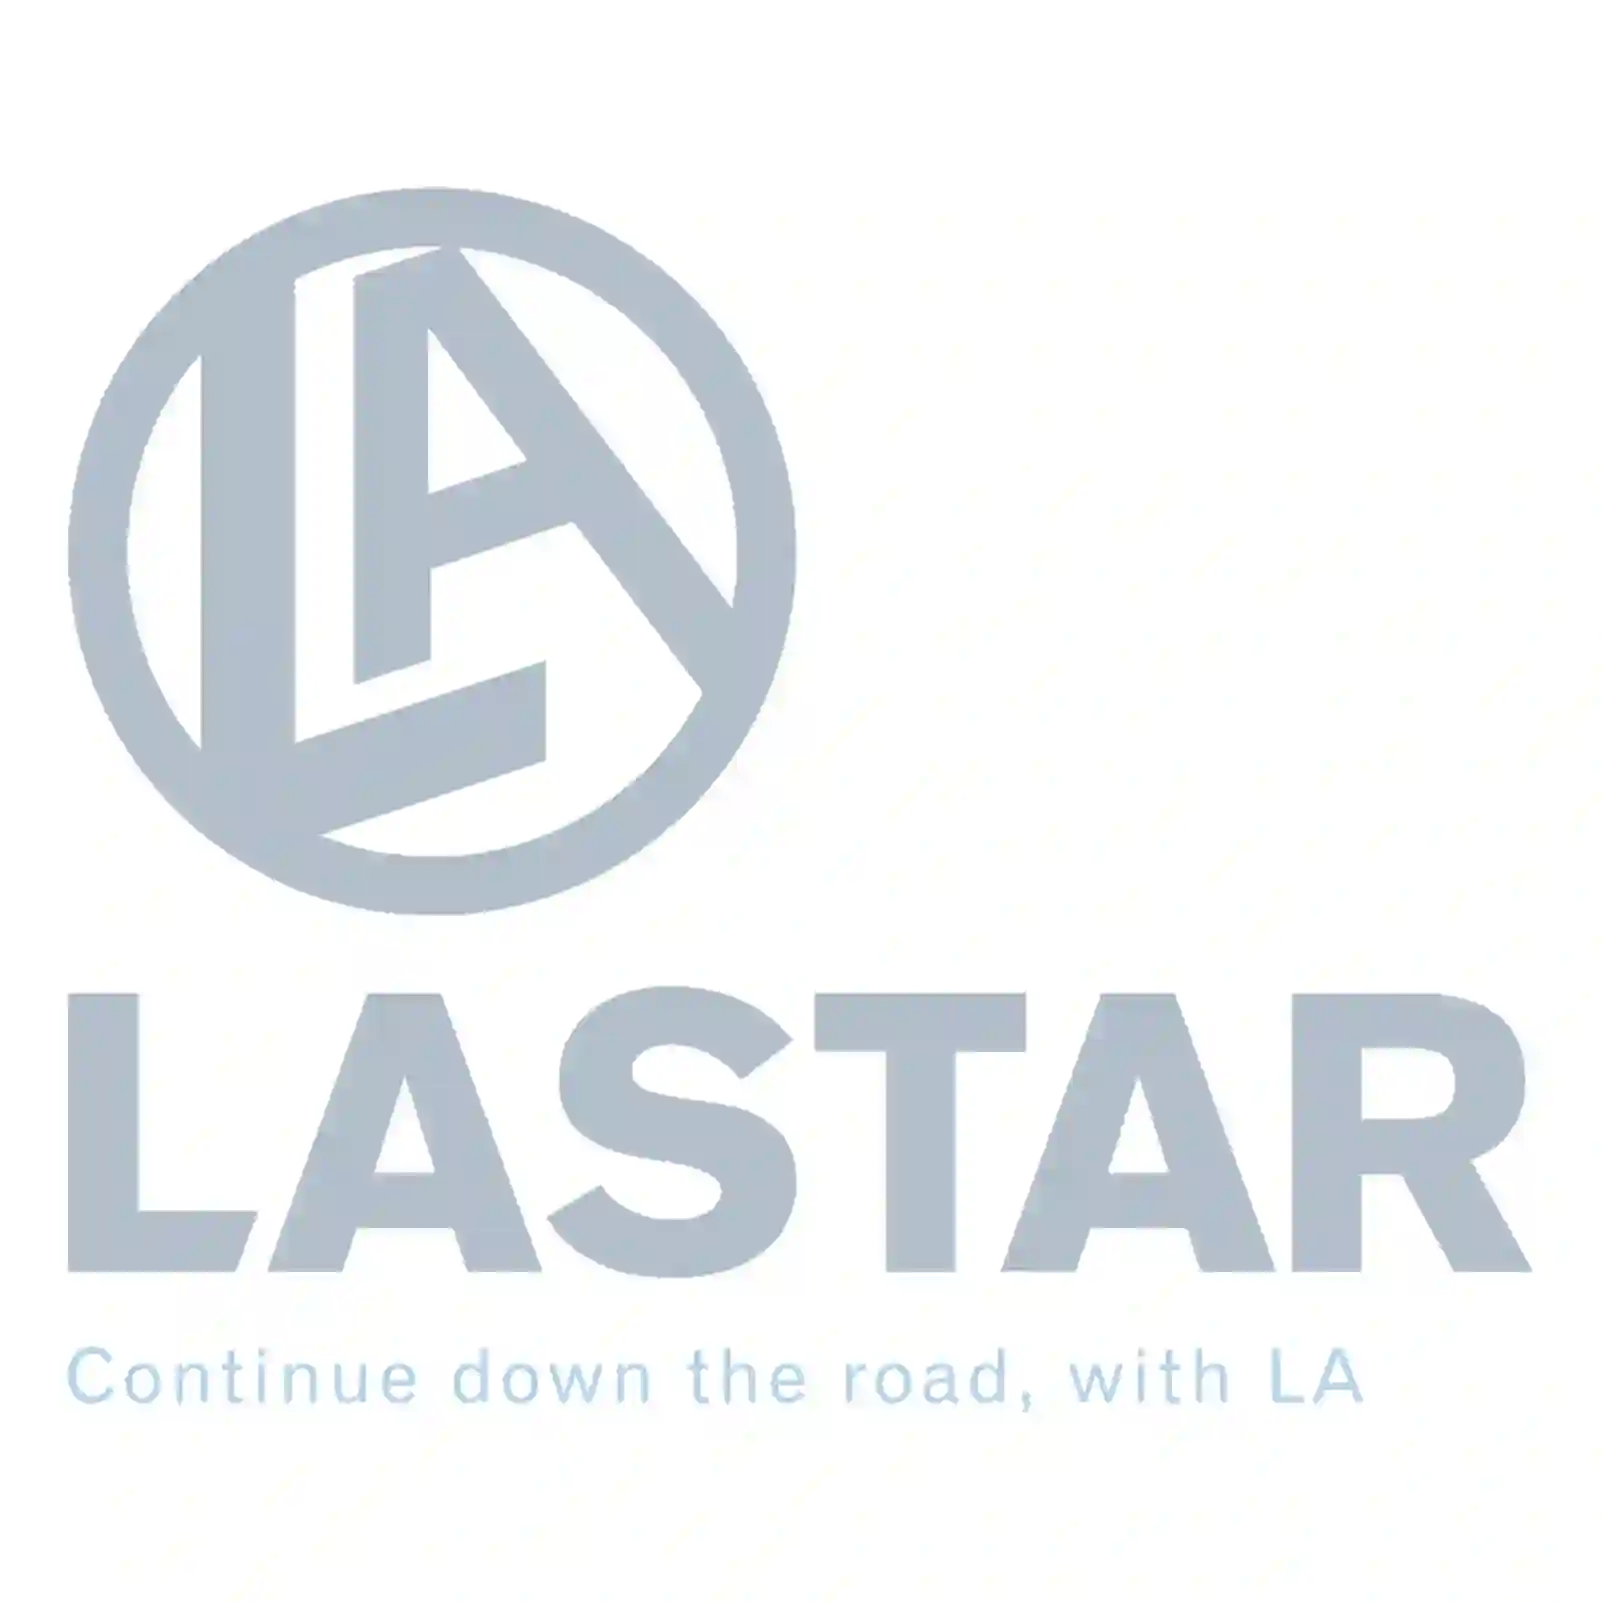  Wheel bearing unit, without housing || Lastar Spare Part | Truck Spare Parts, Auotomotive Spare Parts